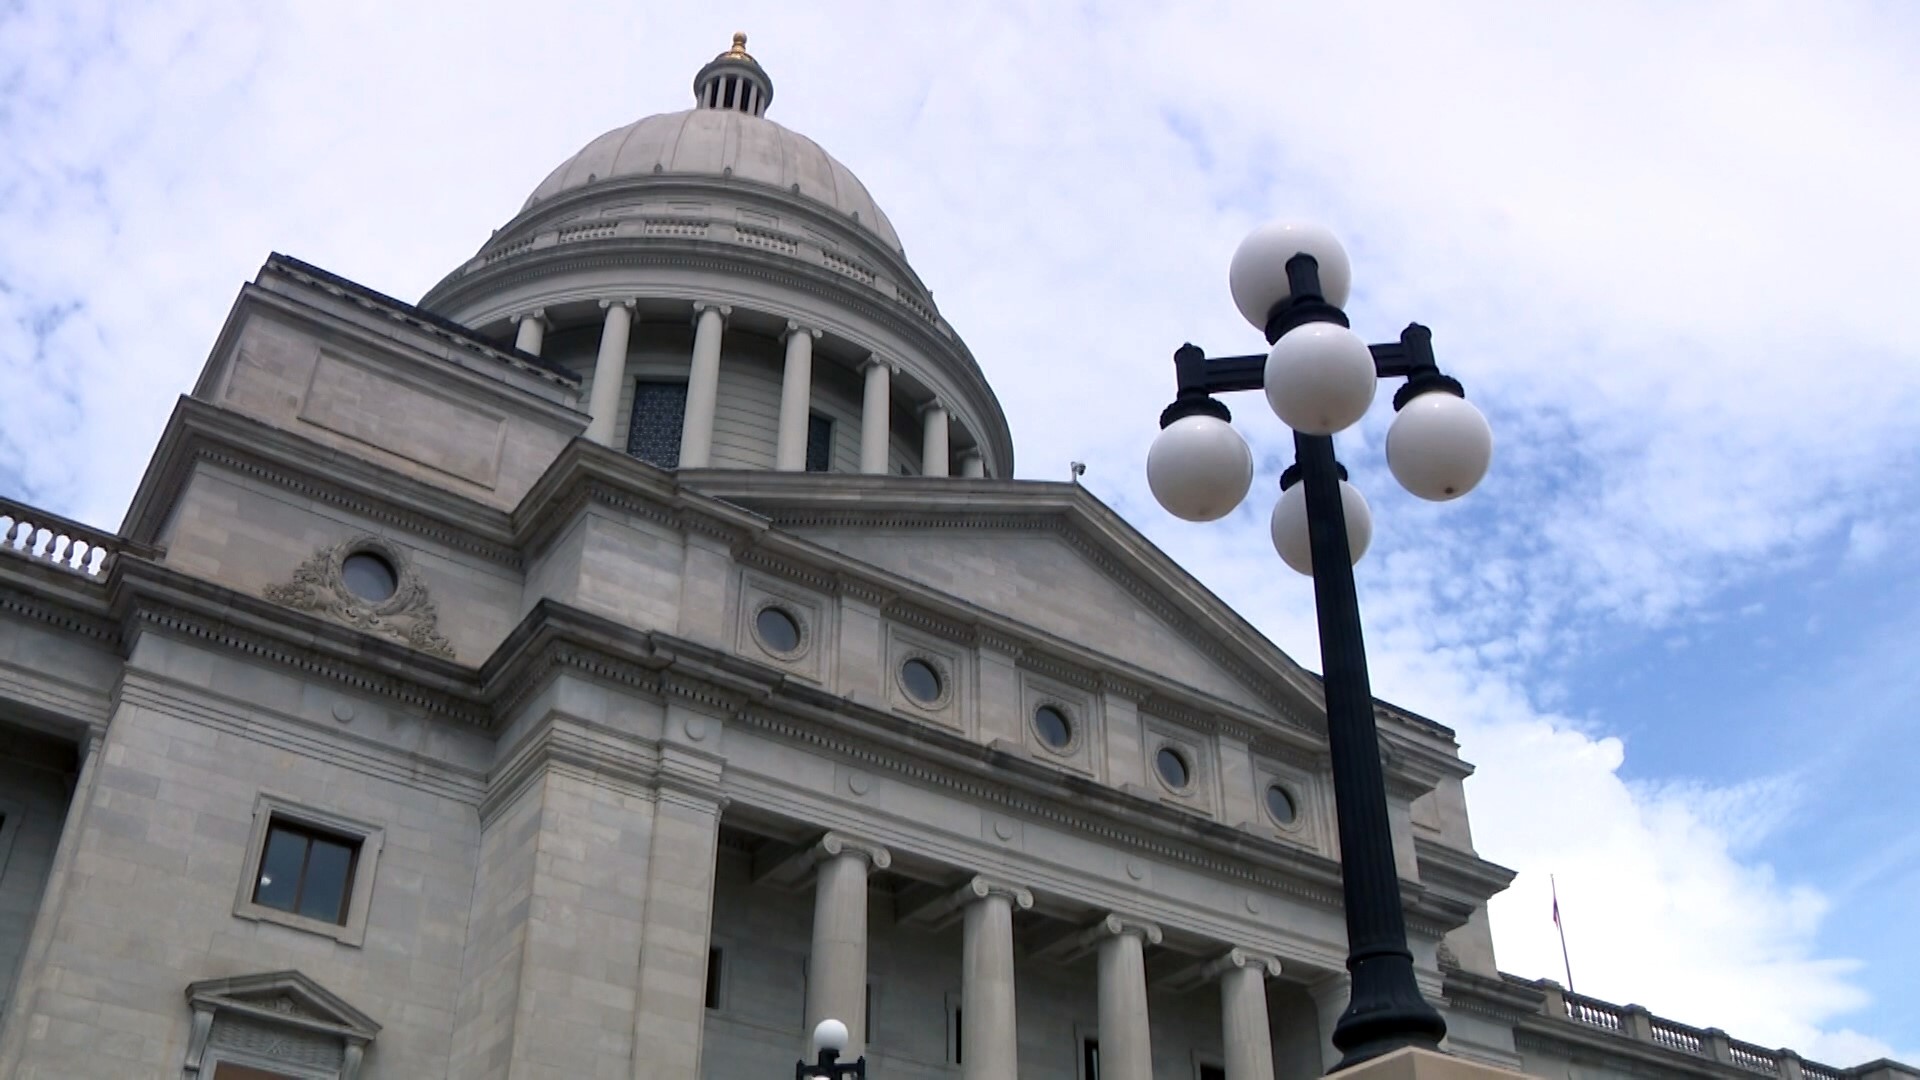 Arkansas lawmakers in the House and Senate approved bills focused on tax cuts and improving school safety.